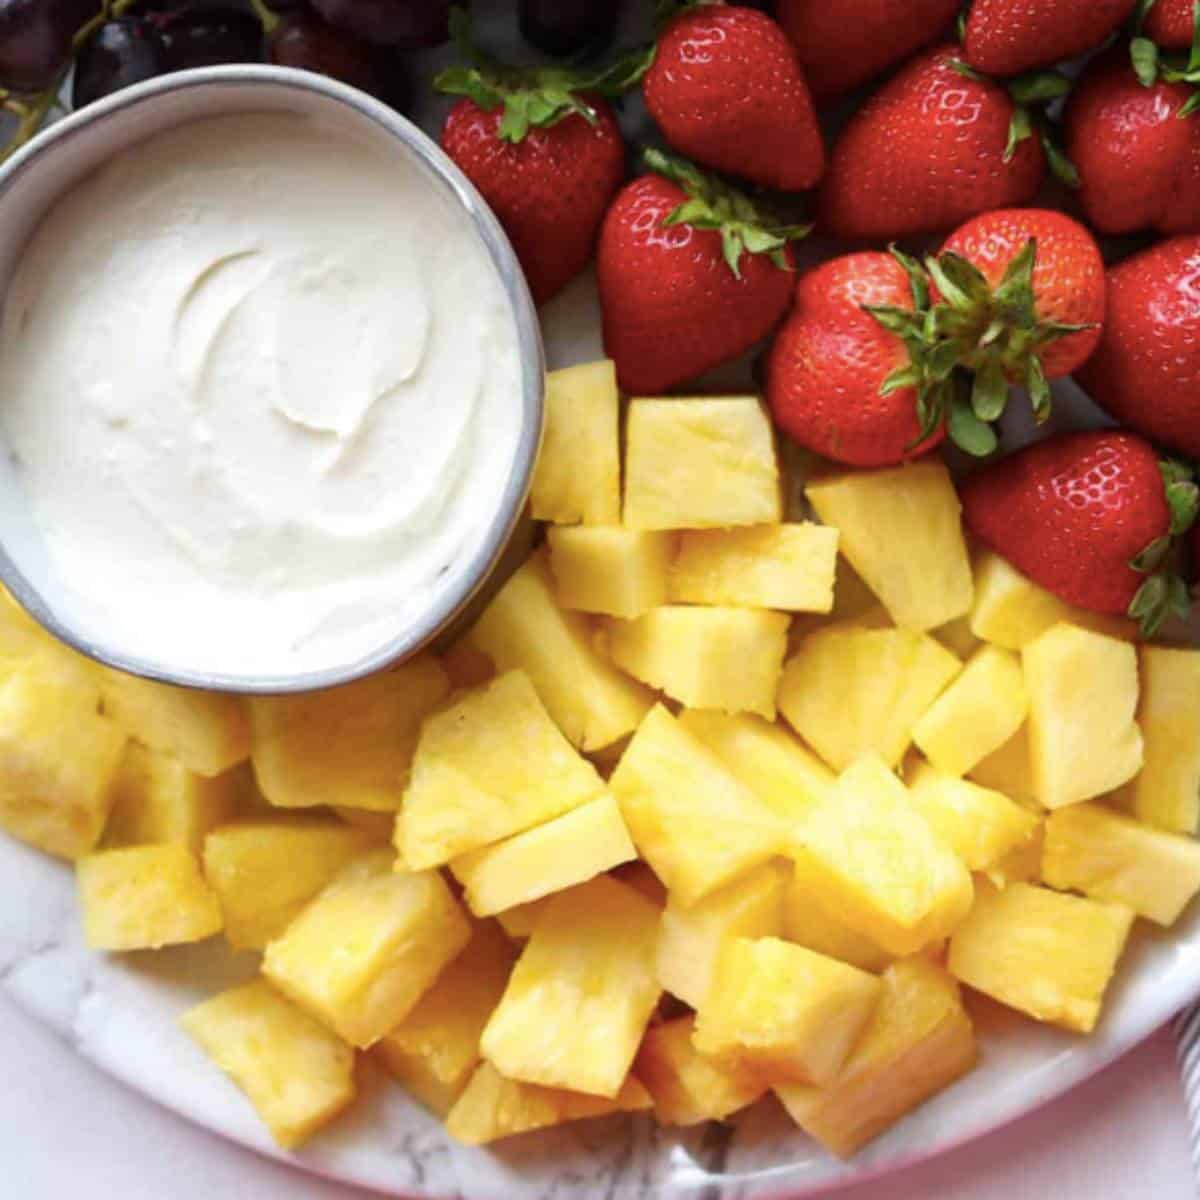 Marshmallow fluff fruit dip with strawberry and pineapple on platter.